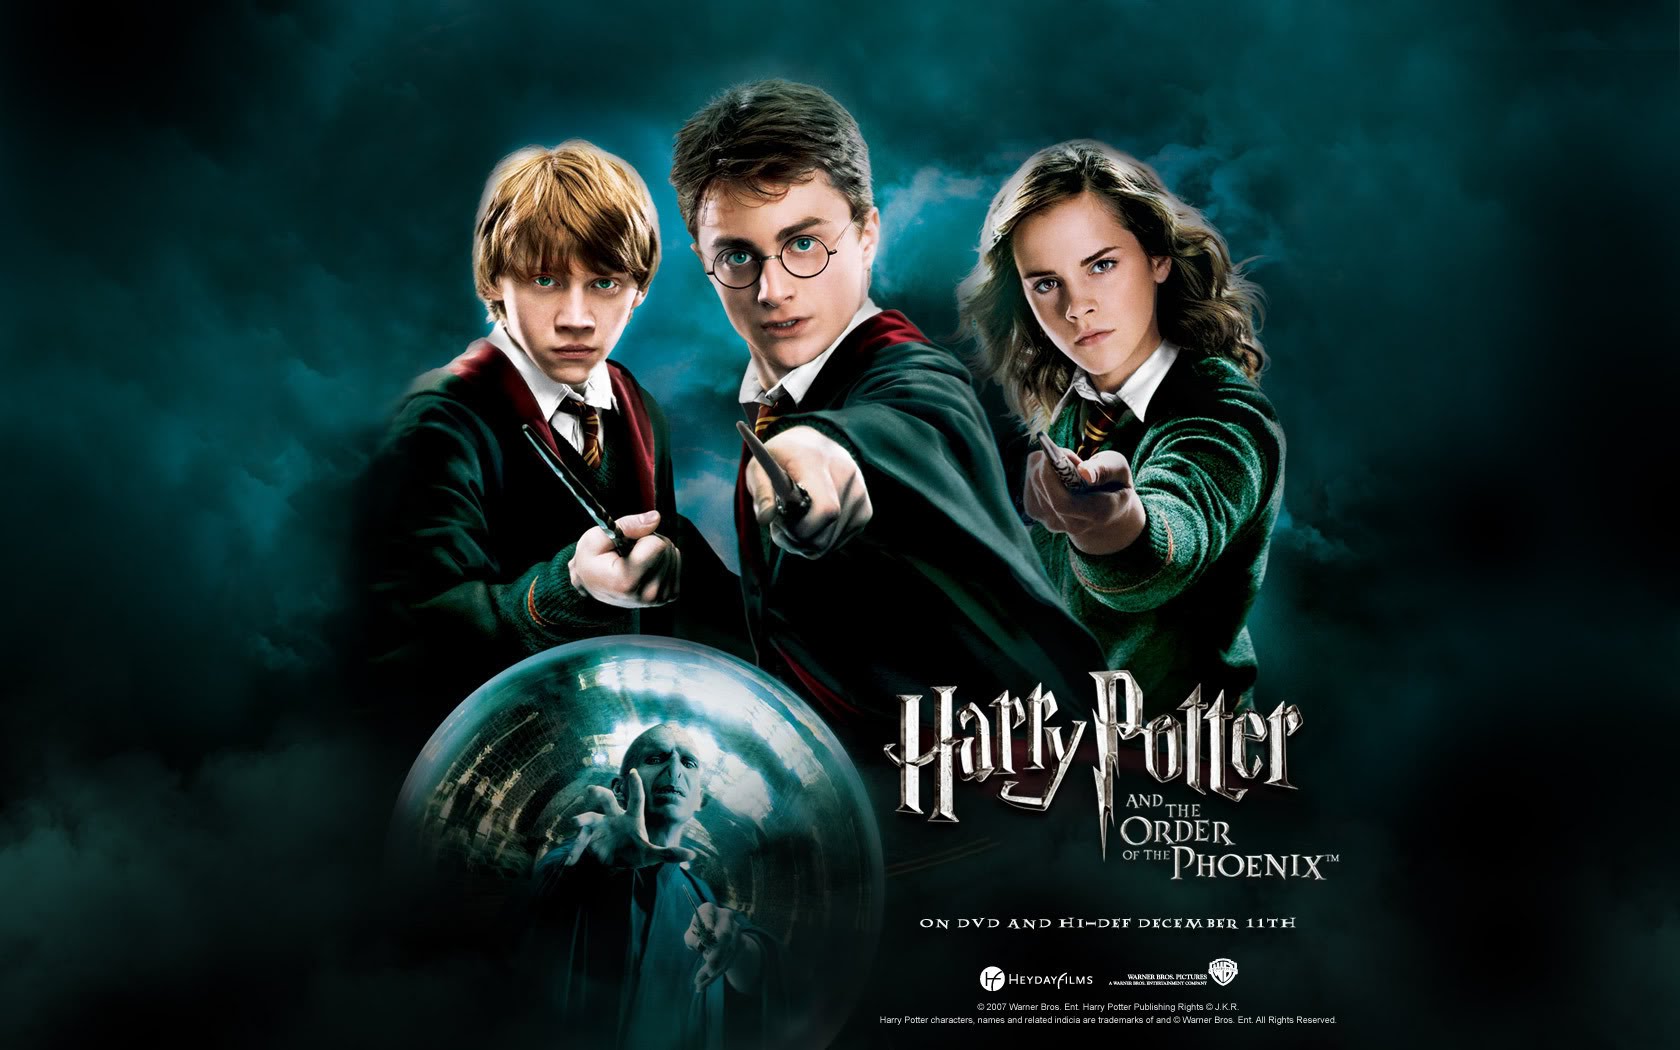 HQ Harry Potter And The Order Of The Phoenix Wallpapers | File 194.31Kb